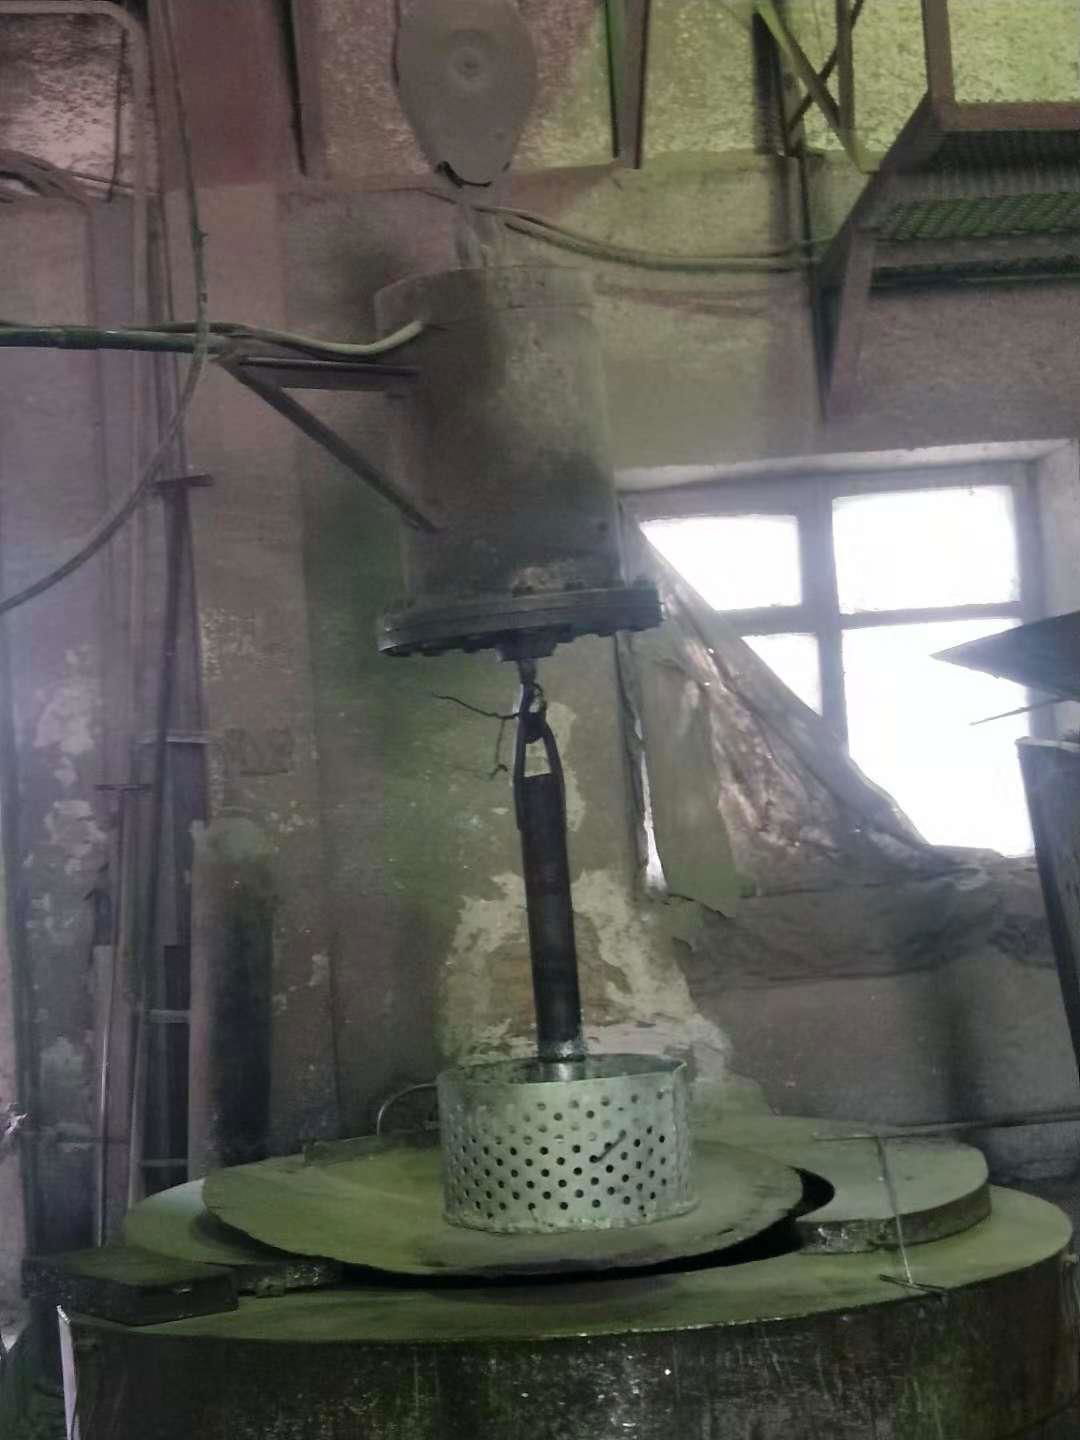 SPIN A BATCH FOR GALVANIZING